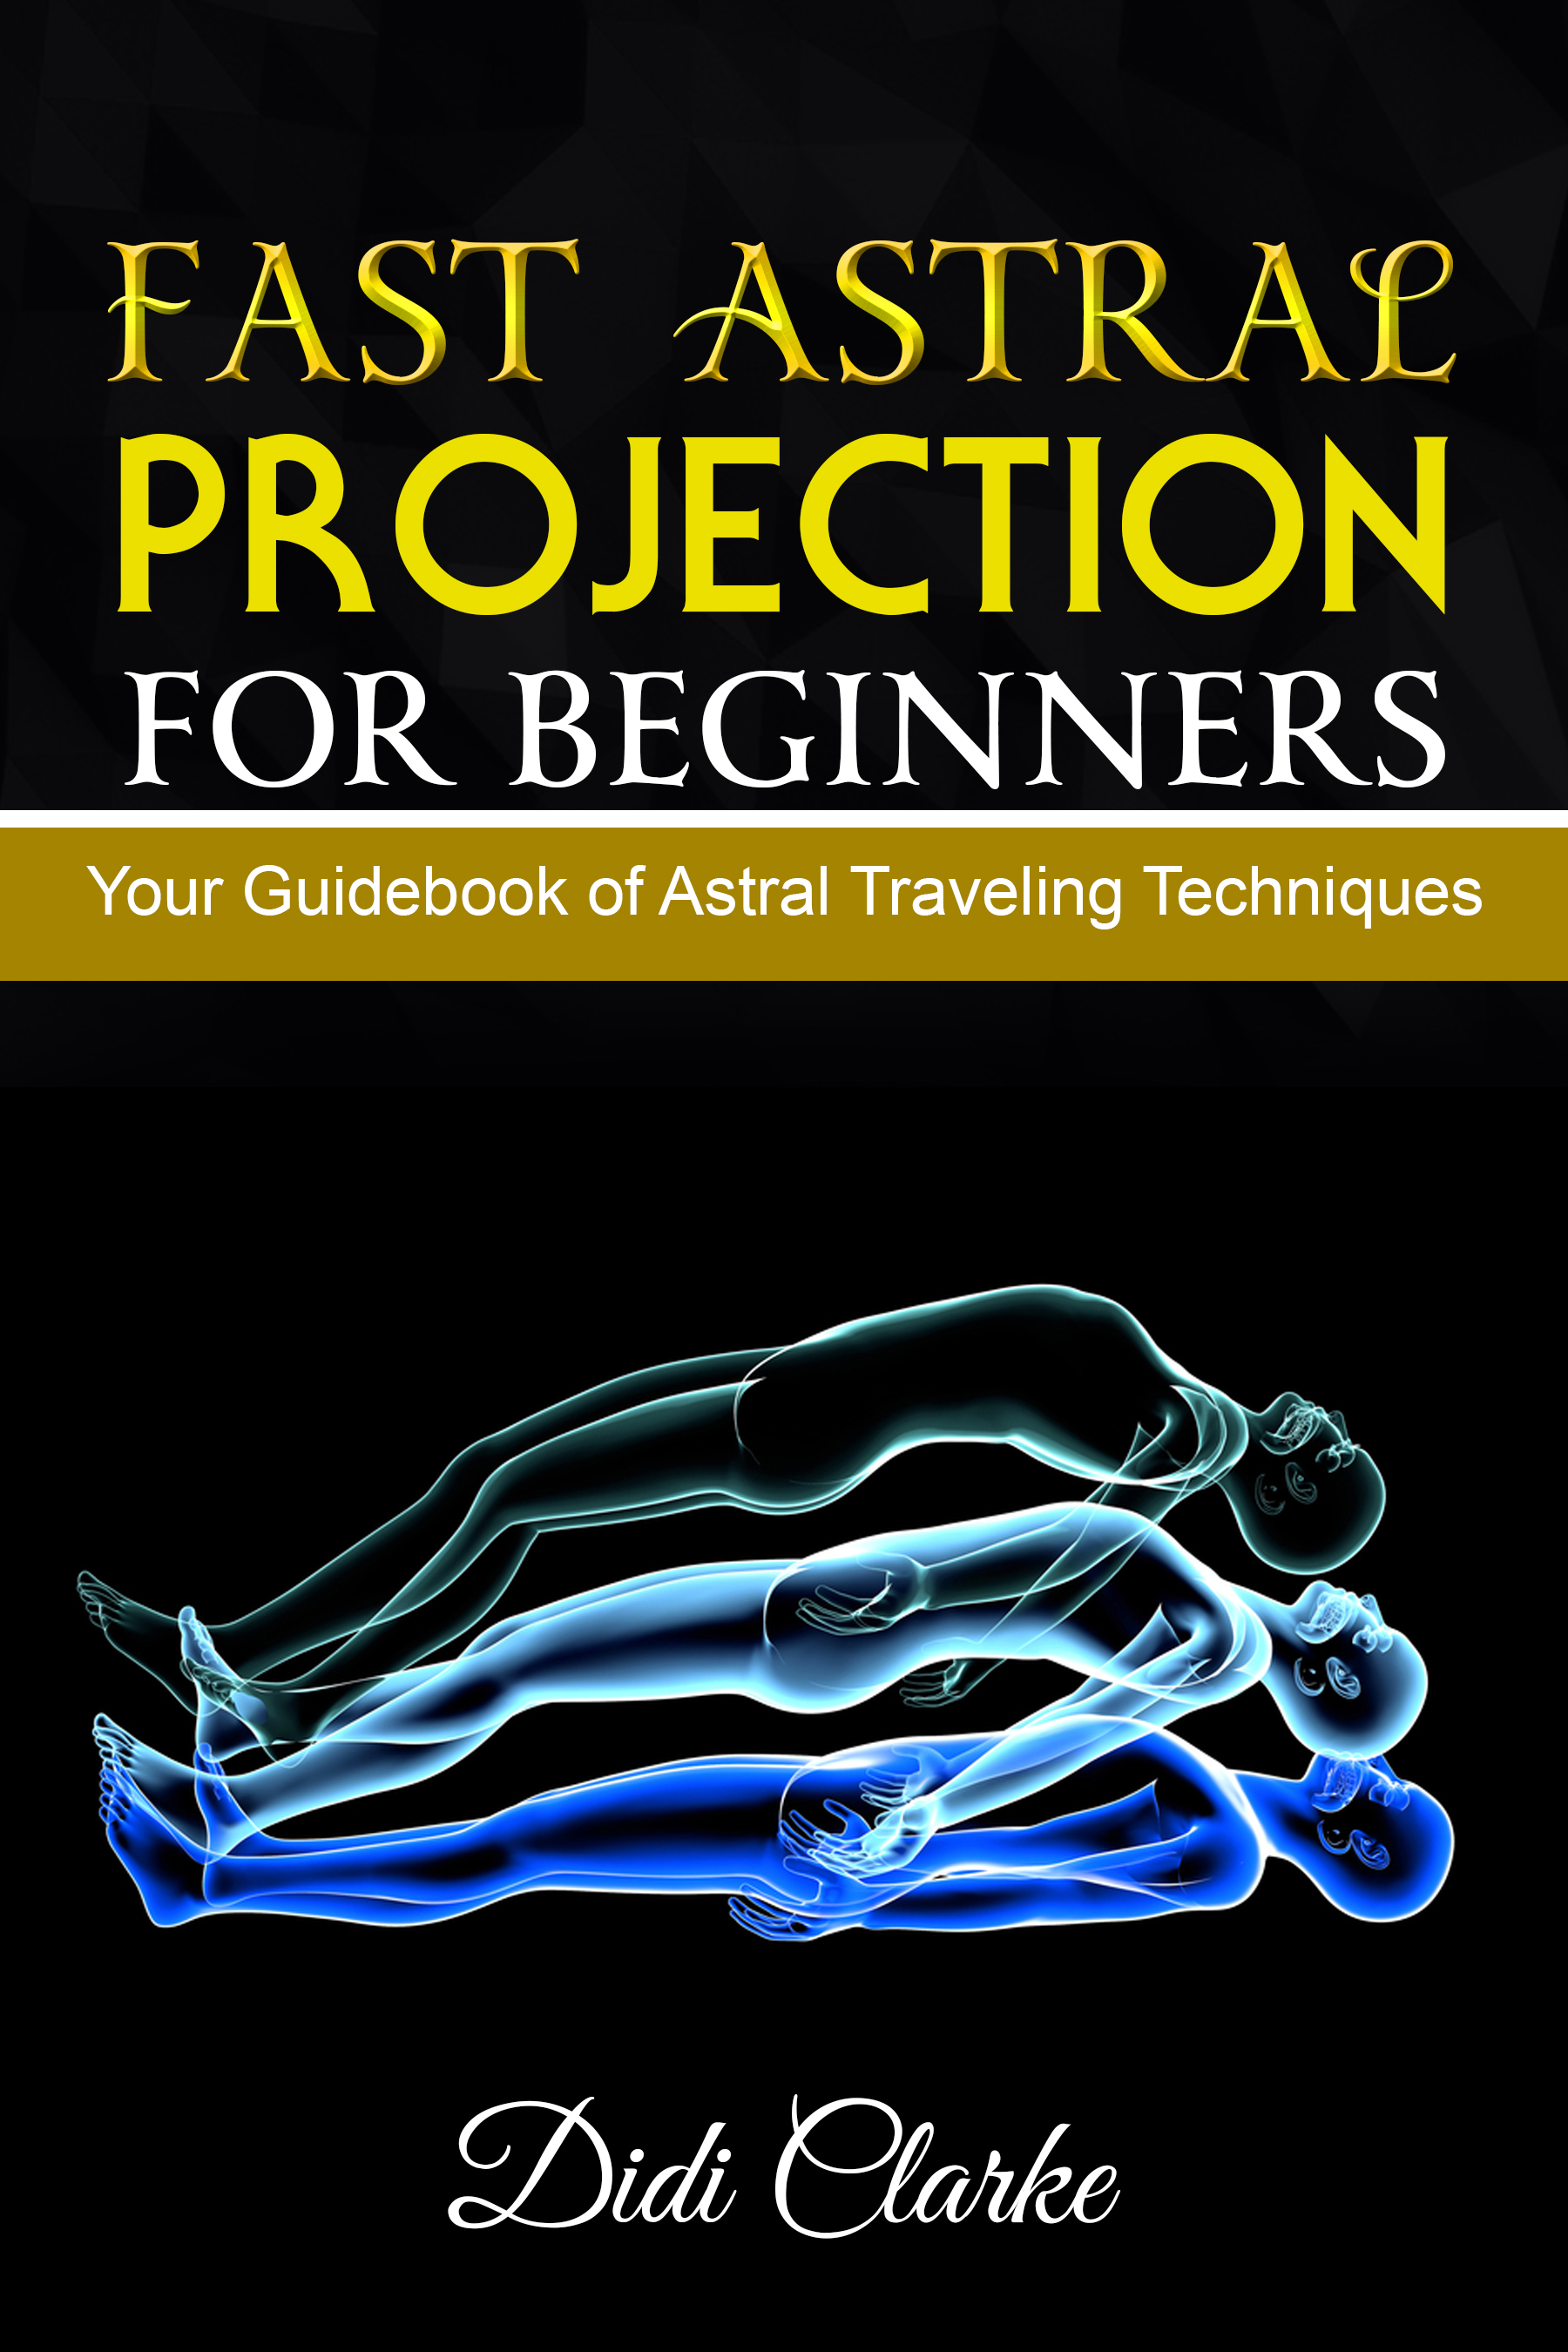 astral projection tips for beginners